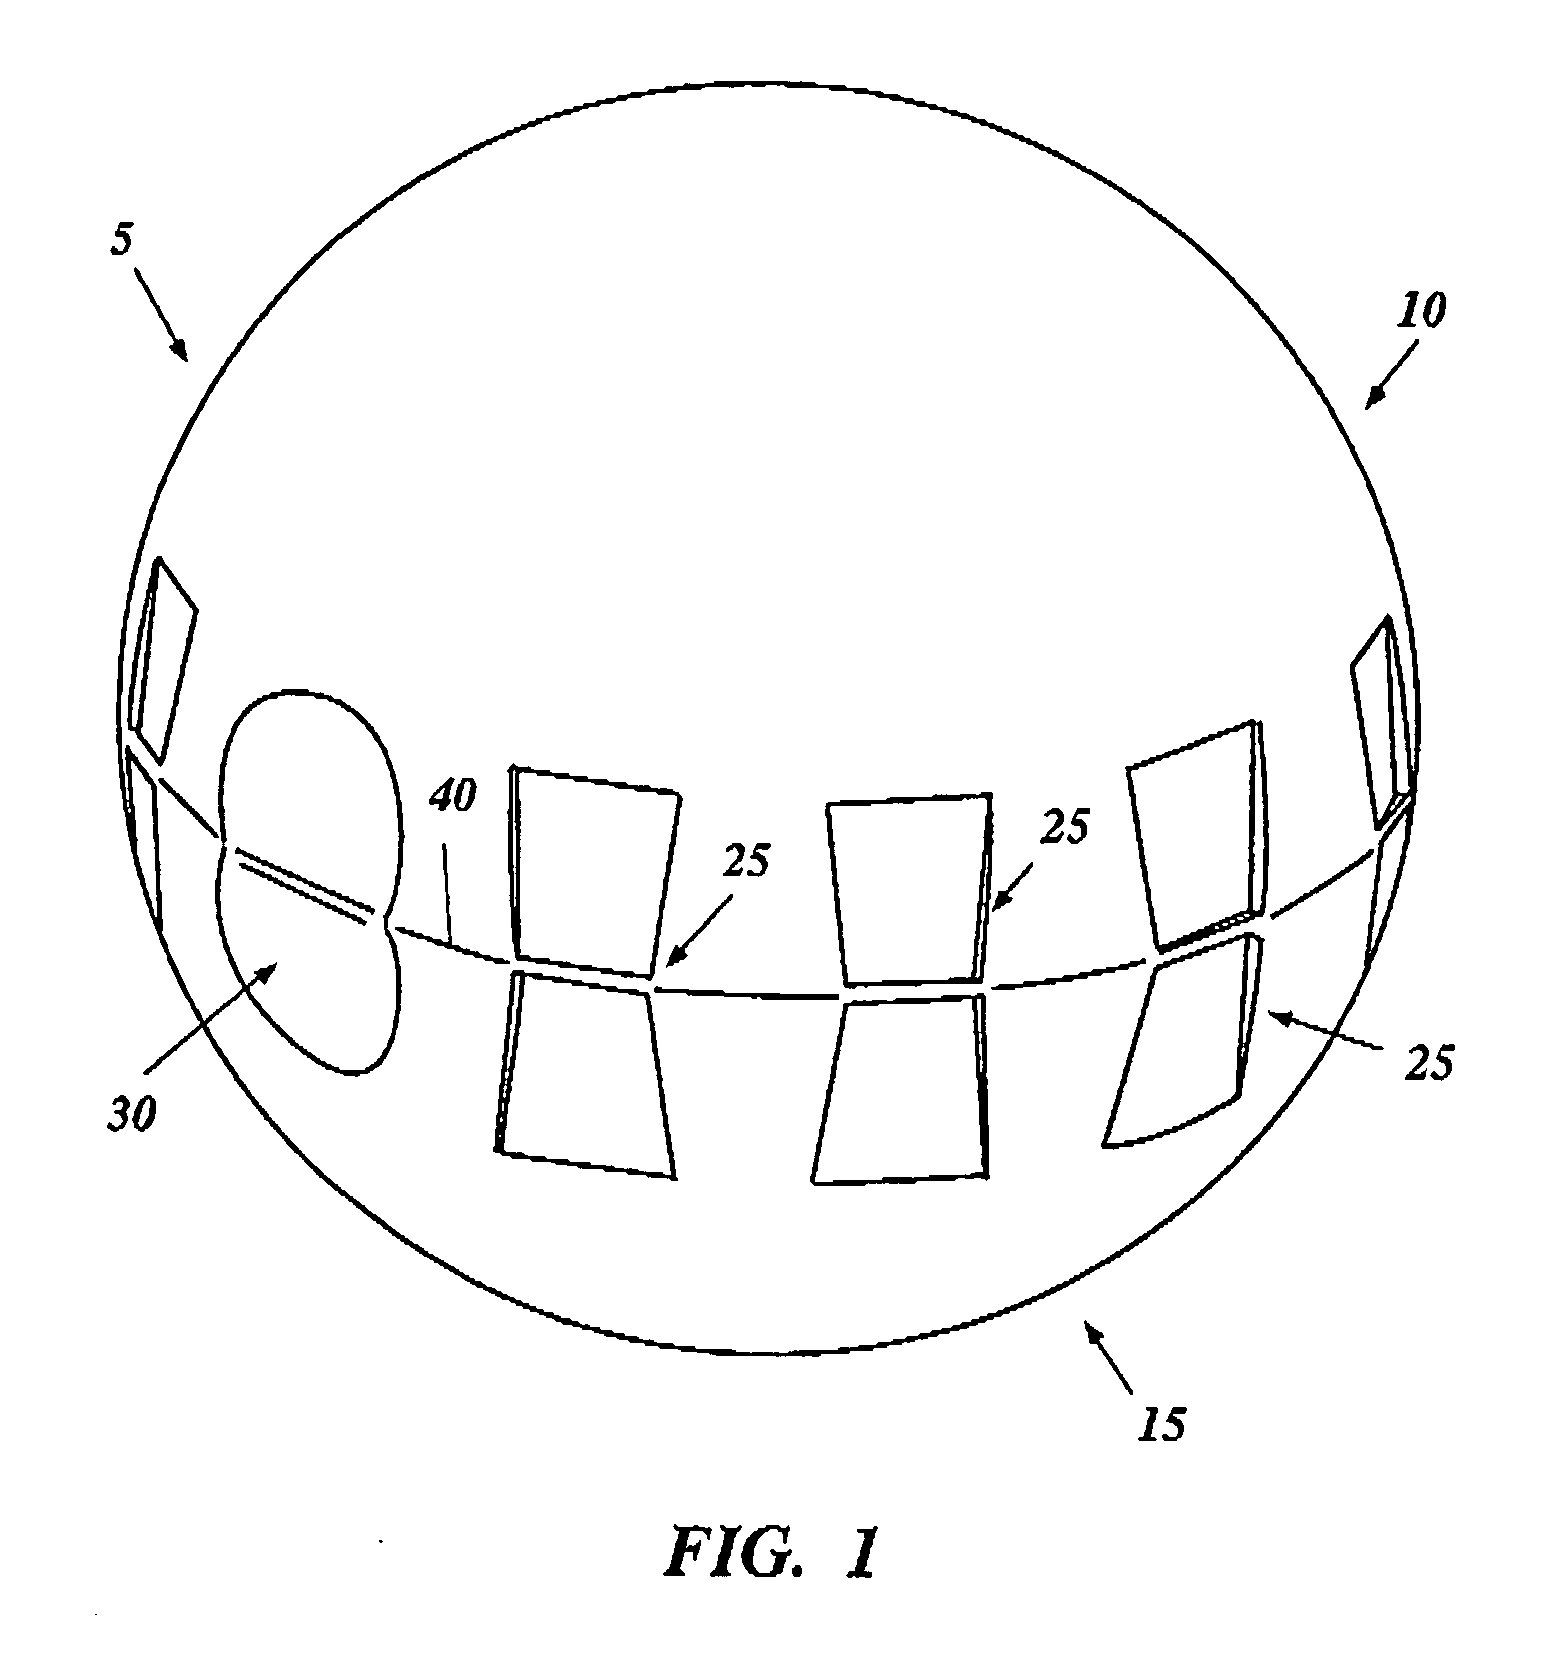 Nestable structural hollow body and related methods